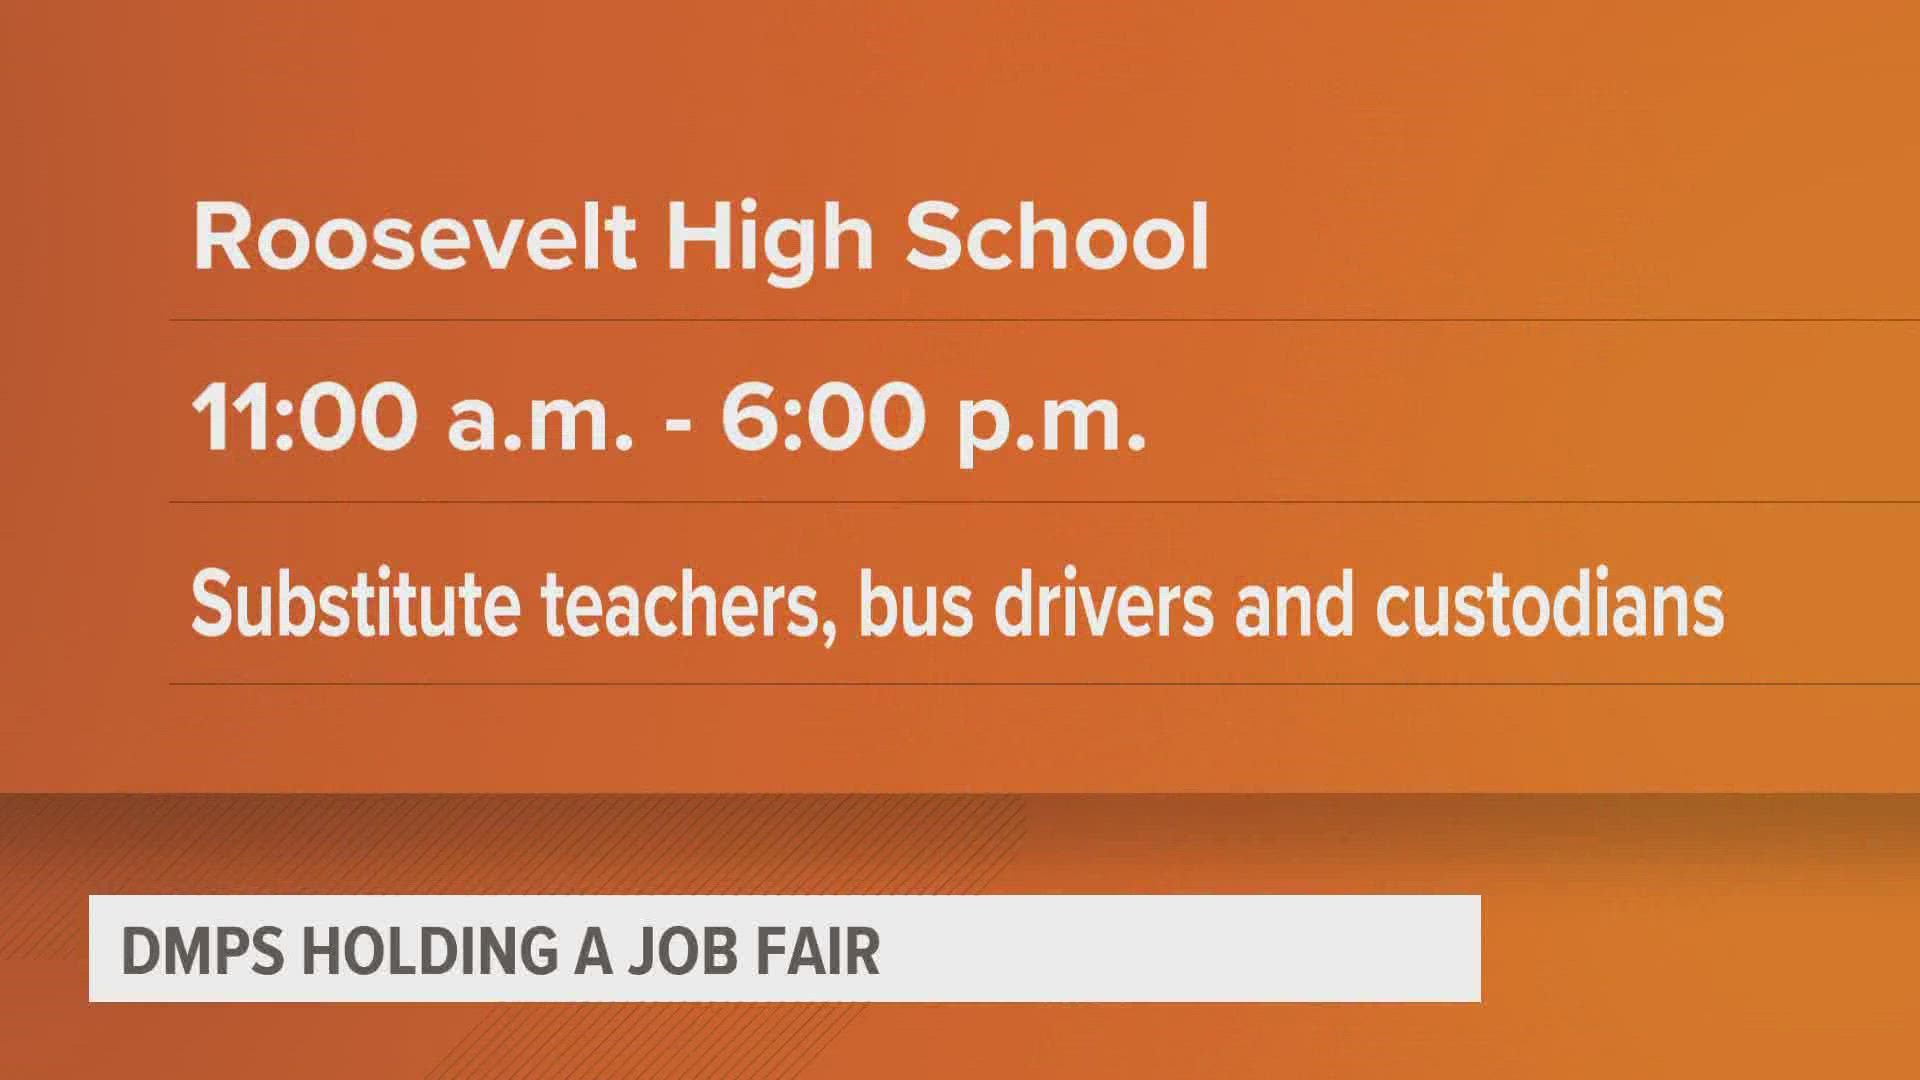 The job fair is at Roosevelt High School in Des Moines from 11 a.m. to 6 p.m. They are looking to hire substitute teachers, bus drivers, custodians and more.